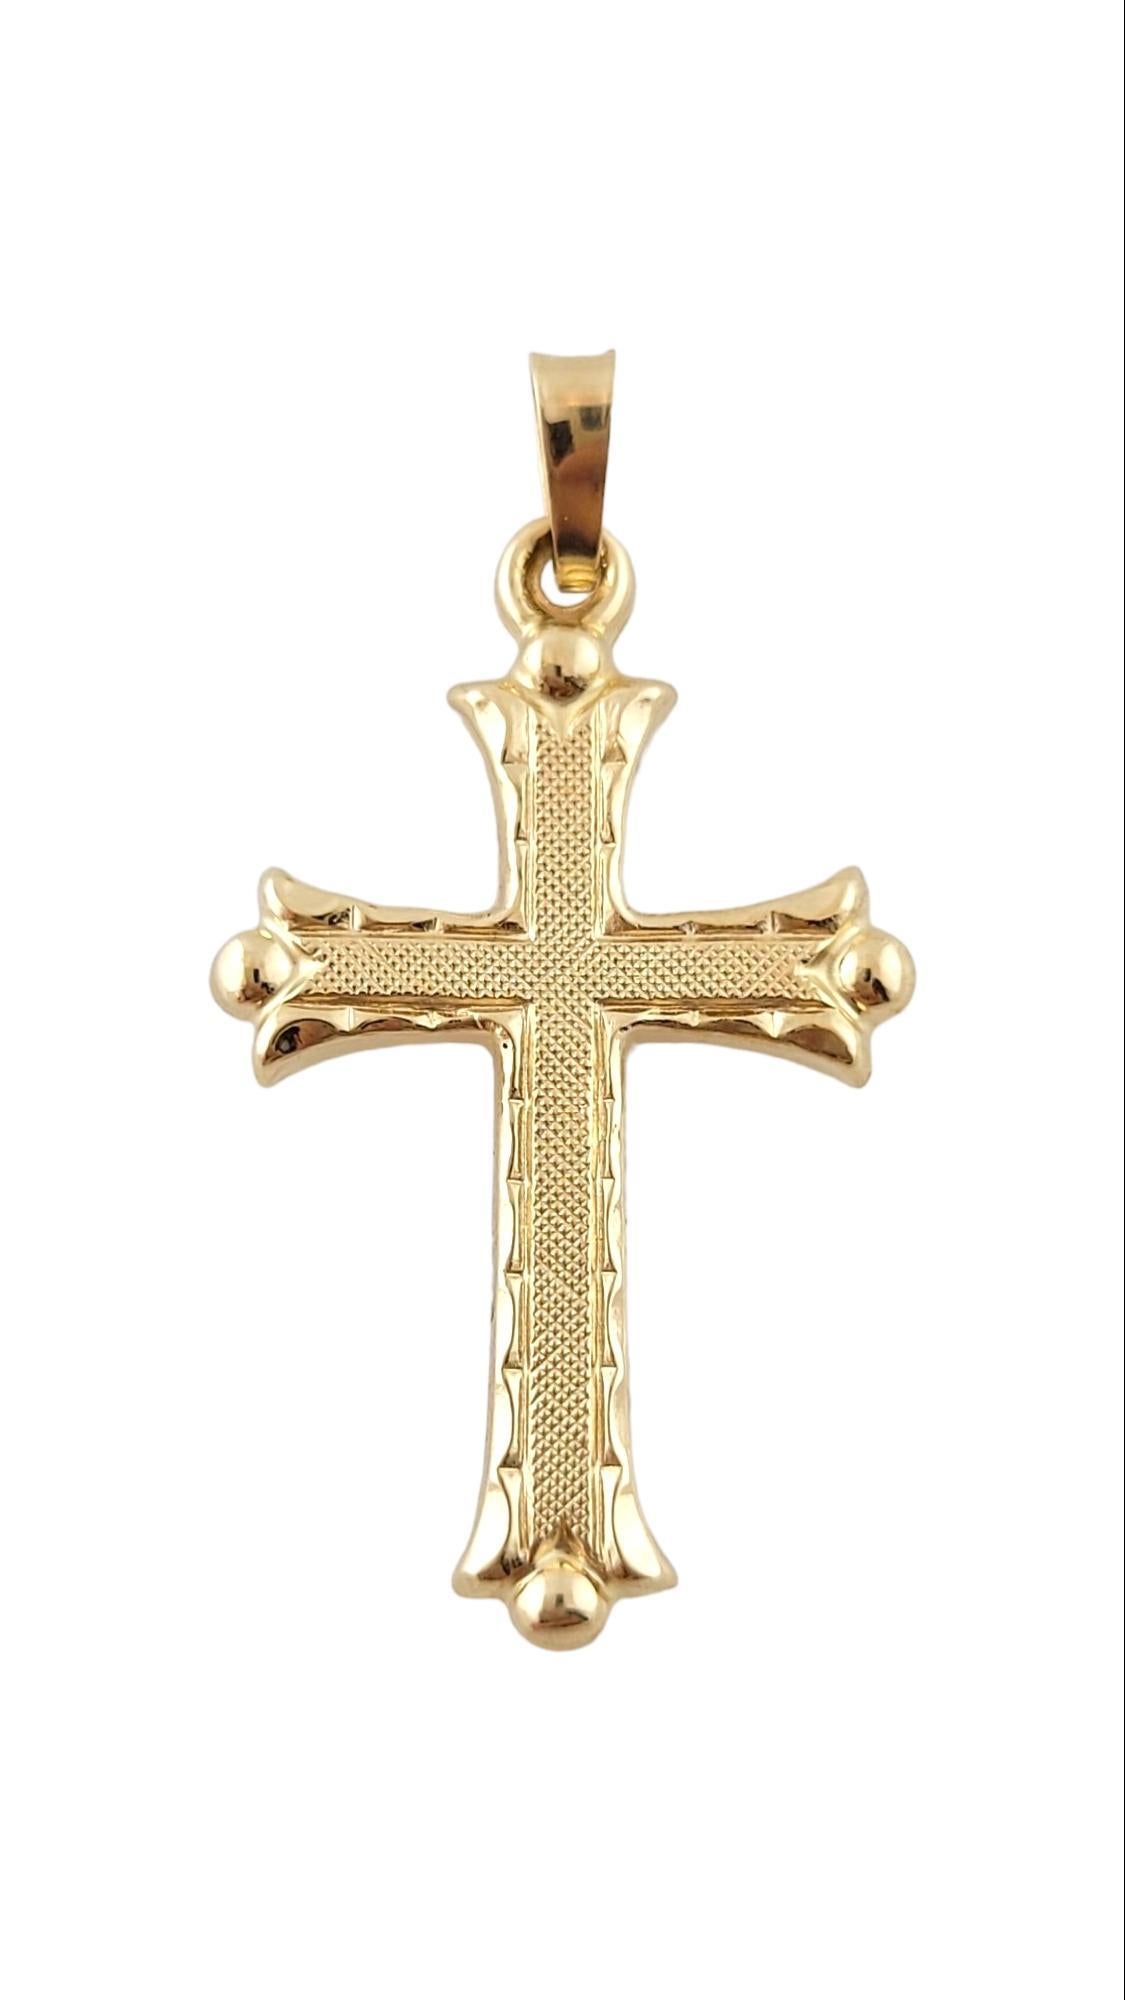 14K Yellow Gold Cross Pendant

This gorgeous cross pendant has beautiful detailing and is crafted from 14K yellow gold for an exquisite finish!

Size: 28.4mm X 17.6mm X 1.8mm
Length w/ bail: 32.9mm

Weight: 1.01 g / 0.7 dwt

Hallmark: 14K

Very good